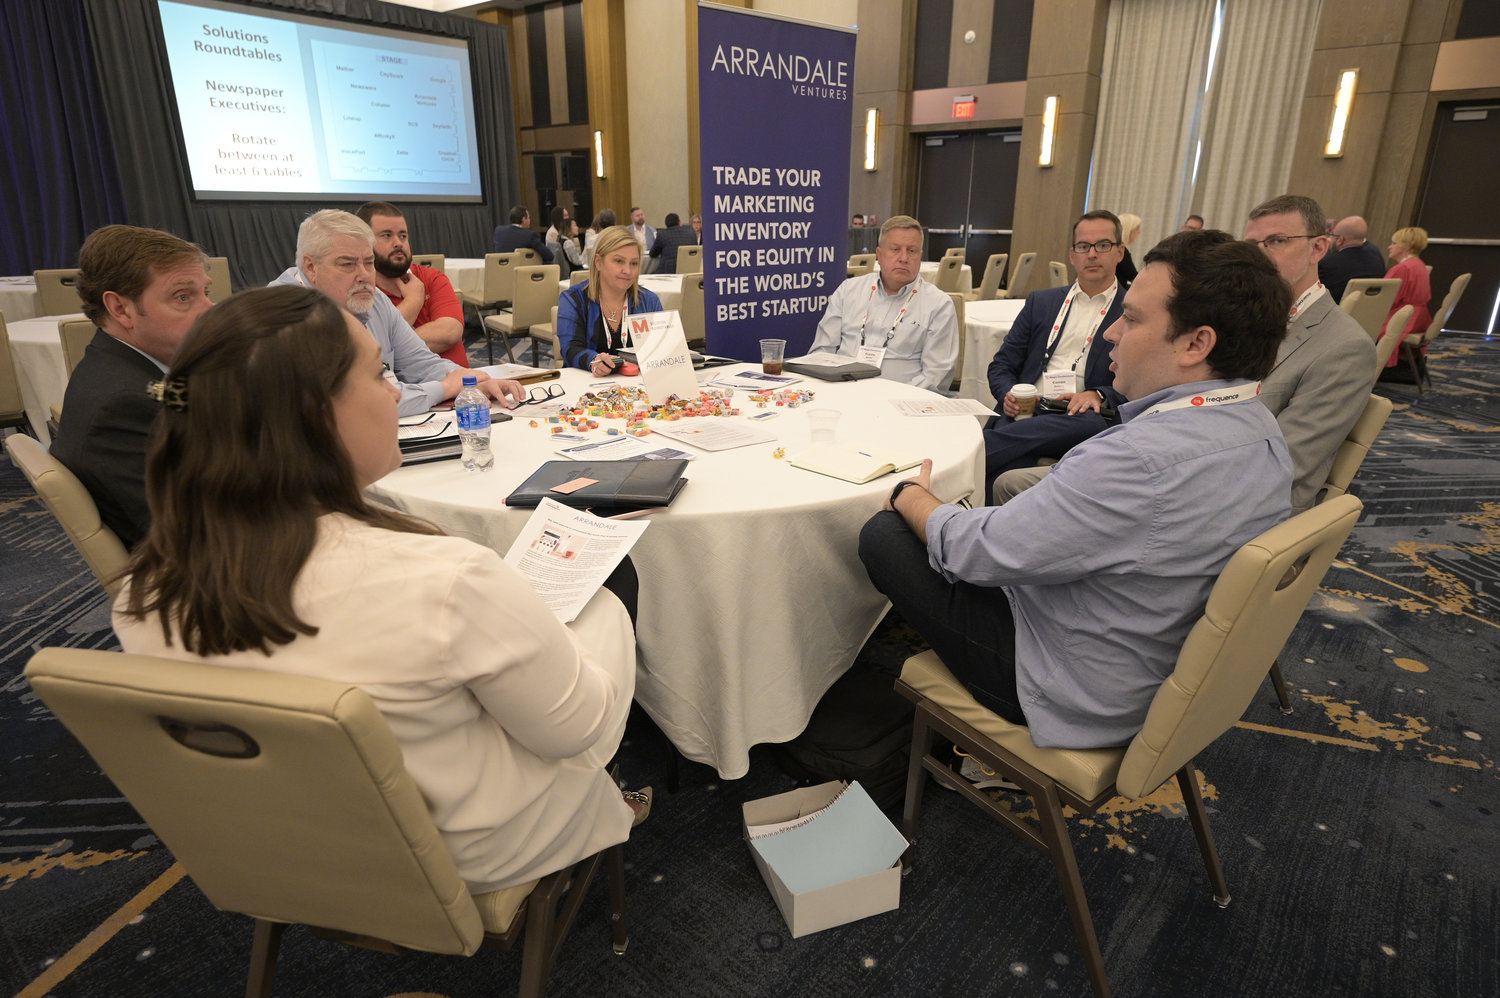 At the Arrandale Ventures Roundtable, attendees learned how they can start getting a piece of the $132 BILLION(!) that startups spent on marketing with Google, Facebook and Amazon last year. (Photo by Phelan M. Ebenhack)